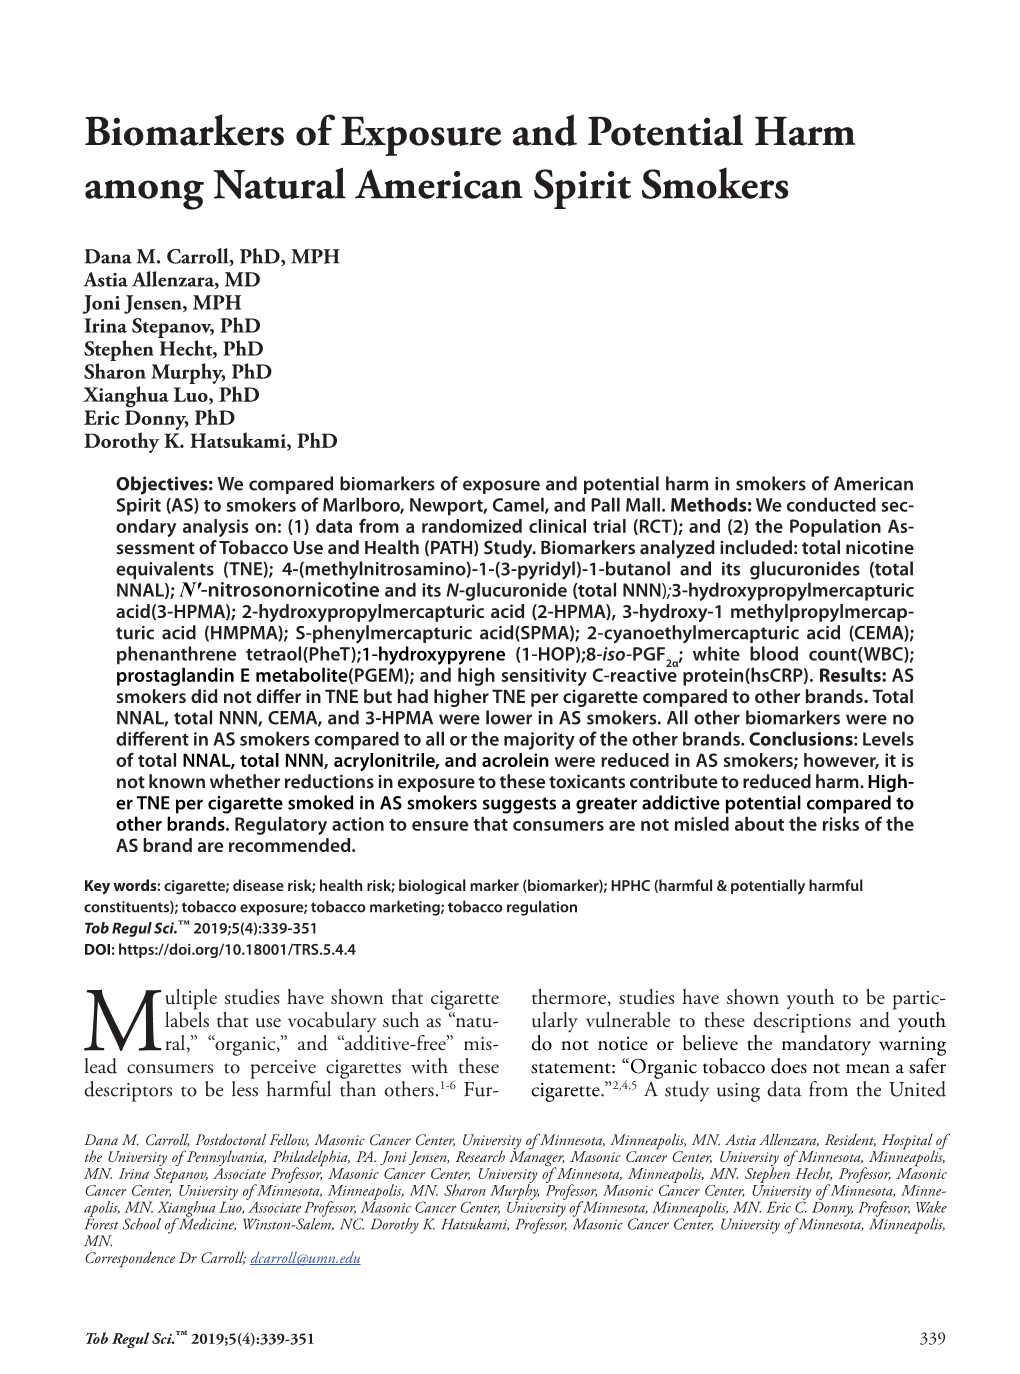 Biomarkers of Exposure and Potential Harm Among Natural American Spirit Smokers